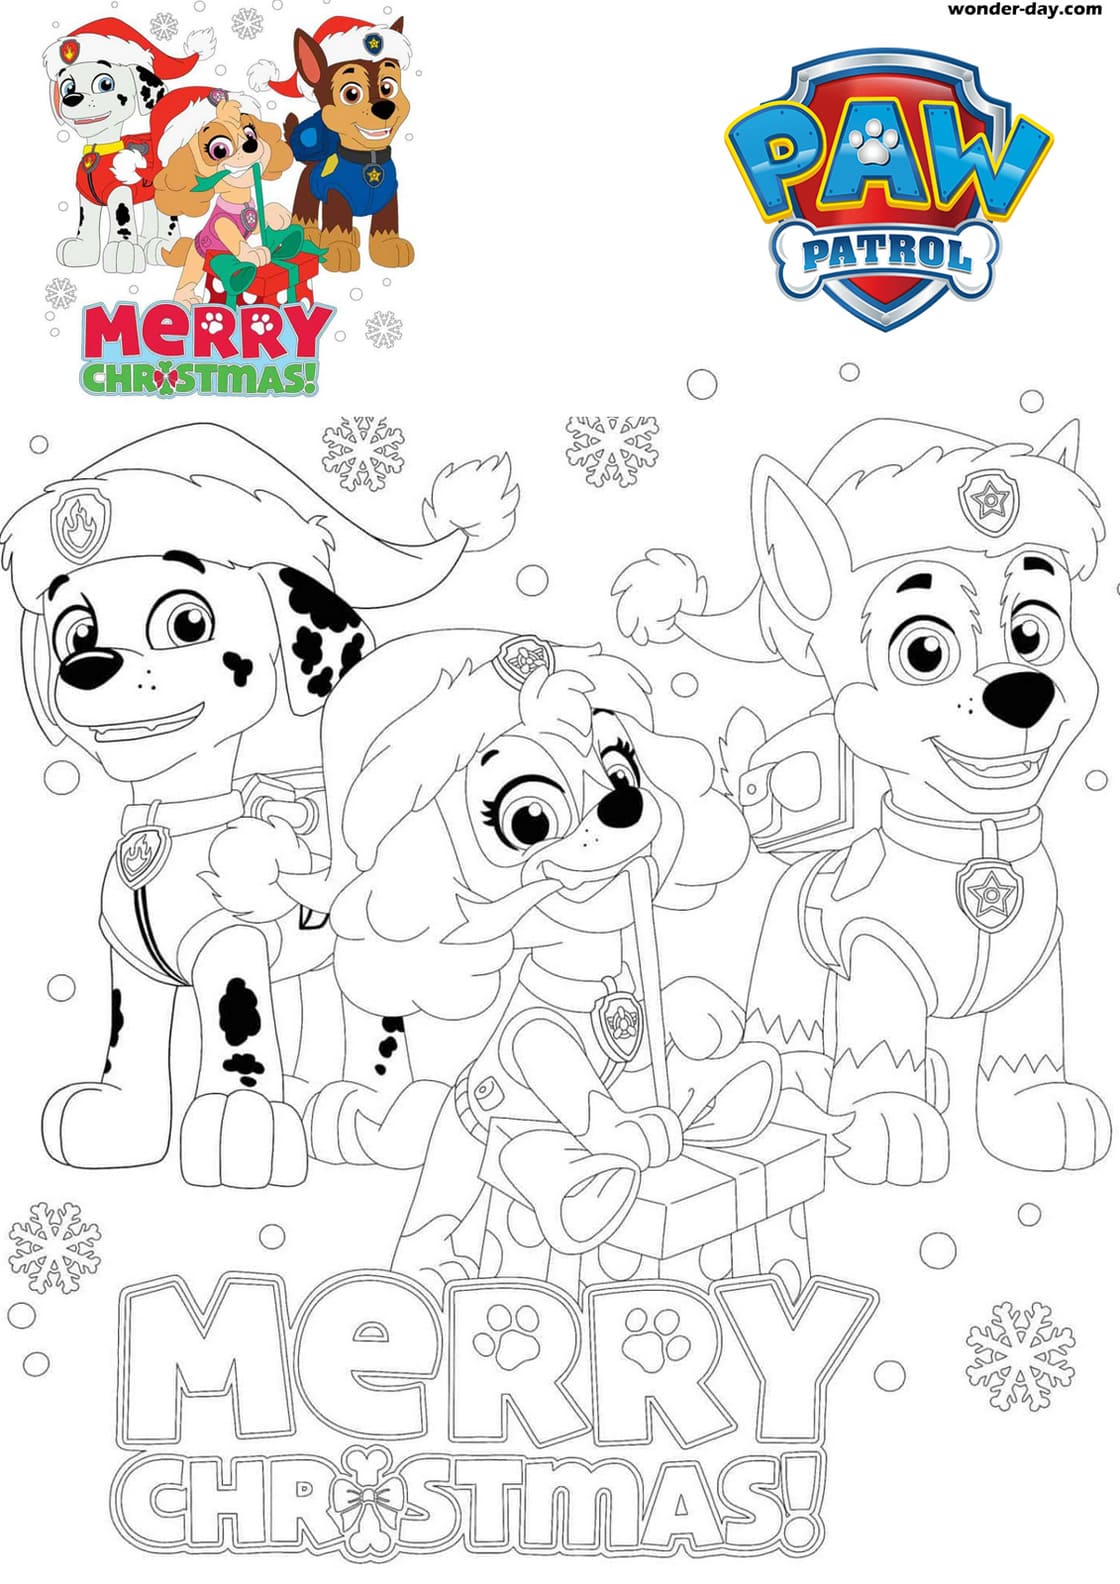 Christmas coloring pages PAW Patrol. Print A20   WONDER DAY ...